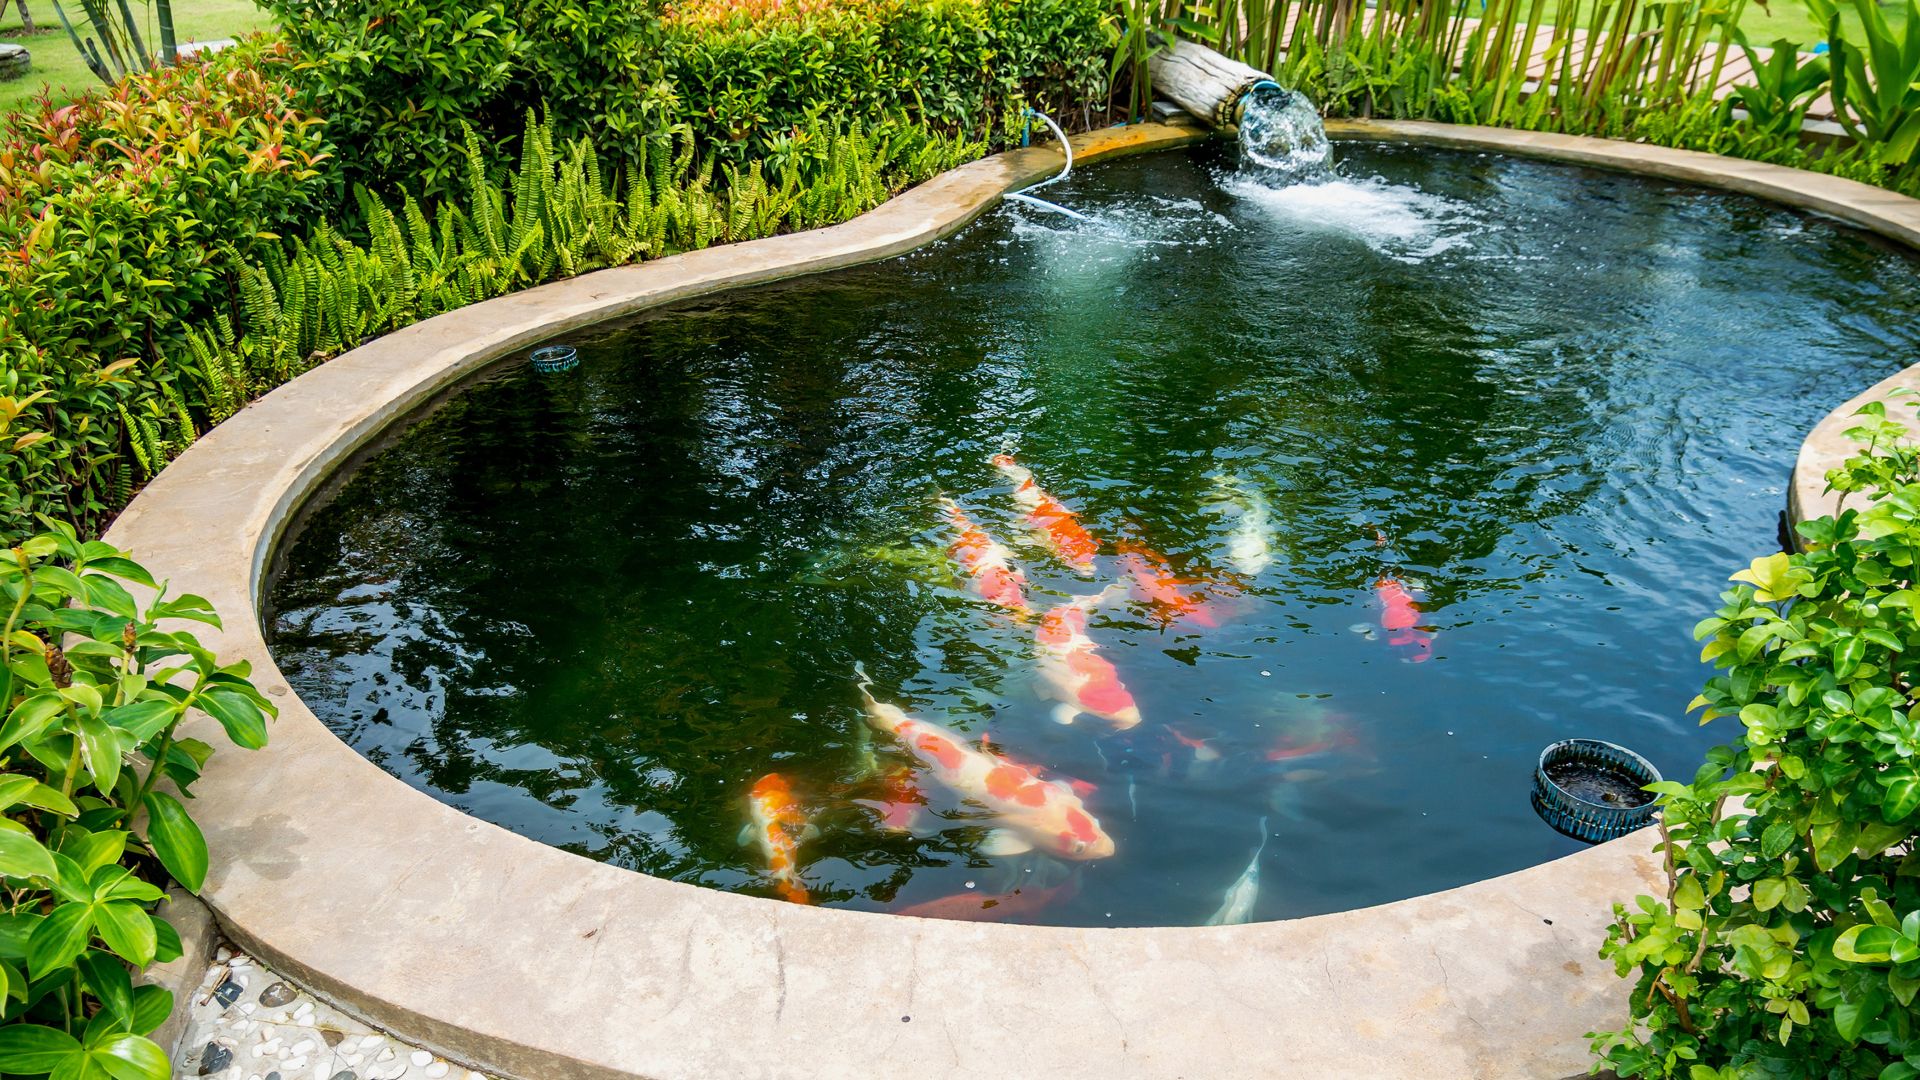 Where to use product guideline to waterproof your pond